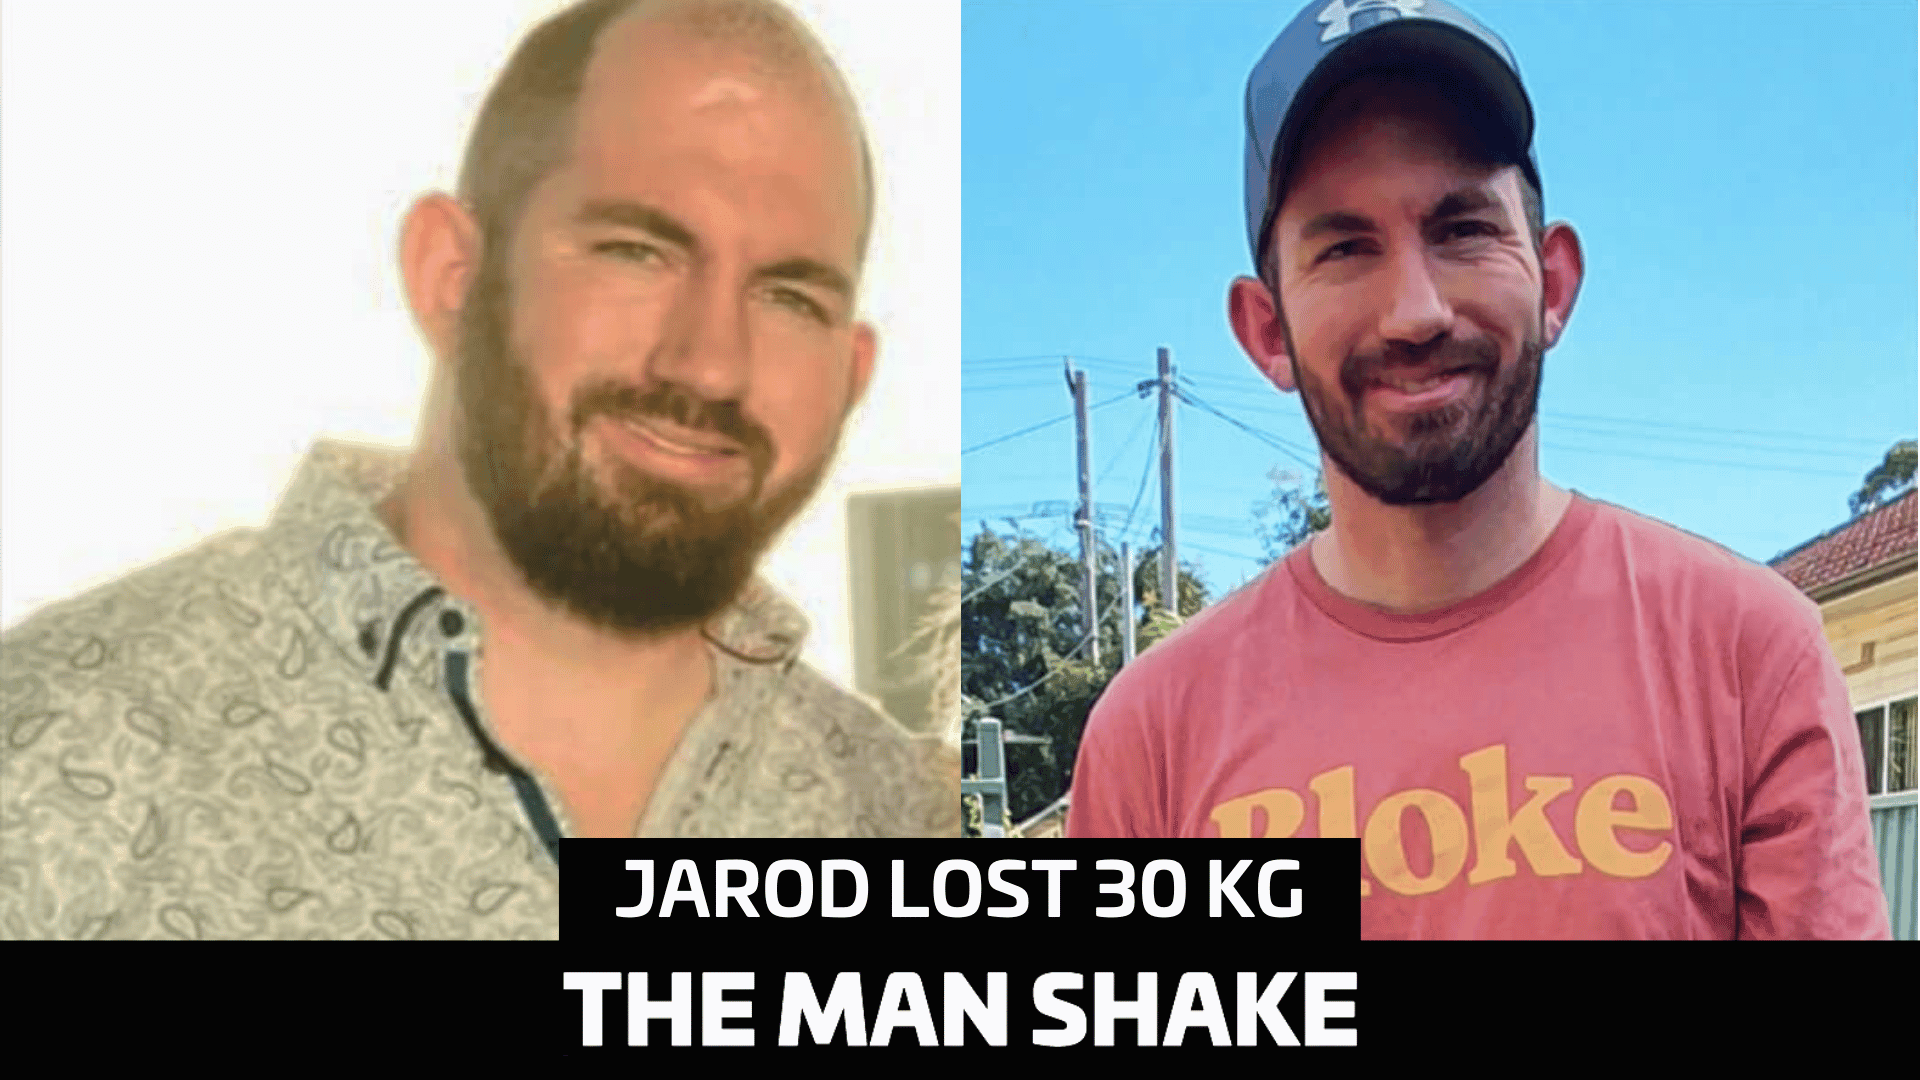 Jarod dropped 30kg surrounded by pizza everyday!